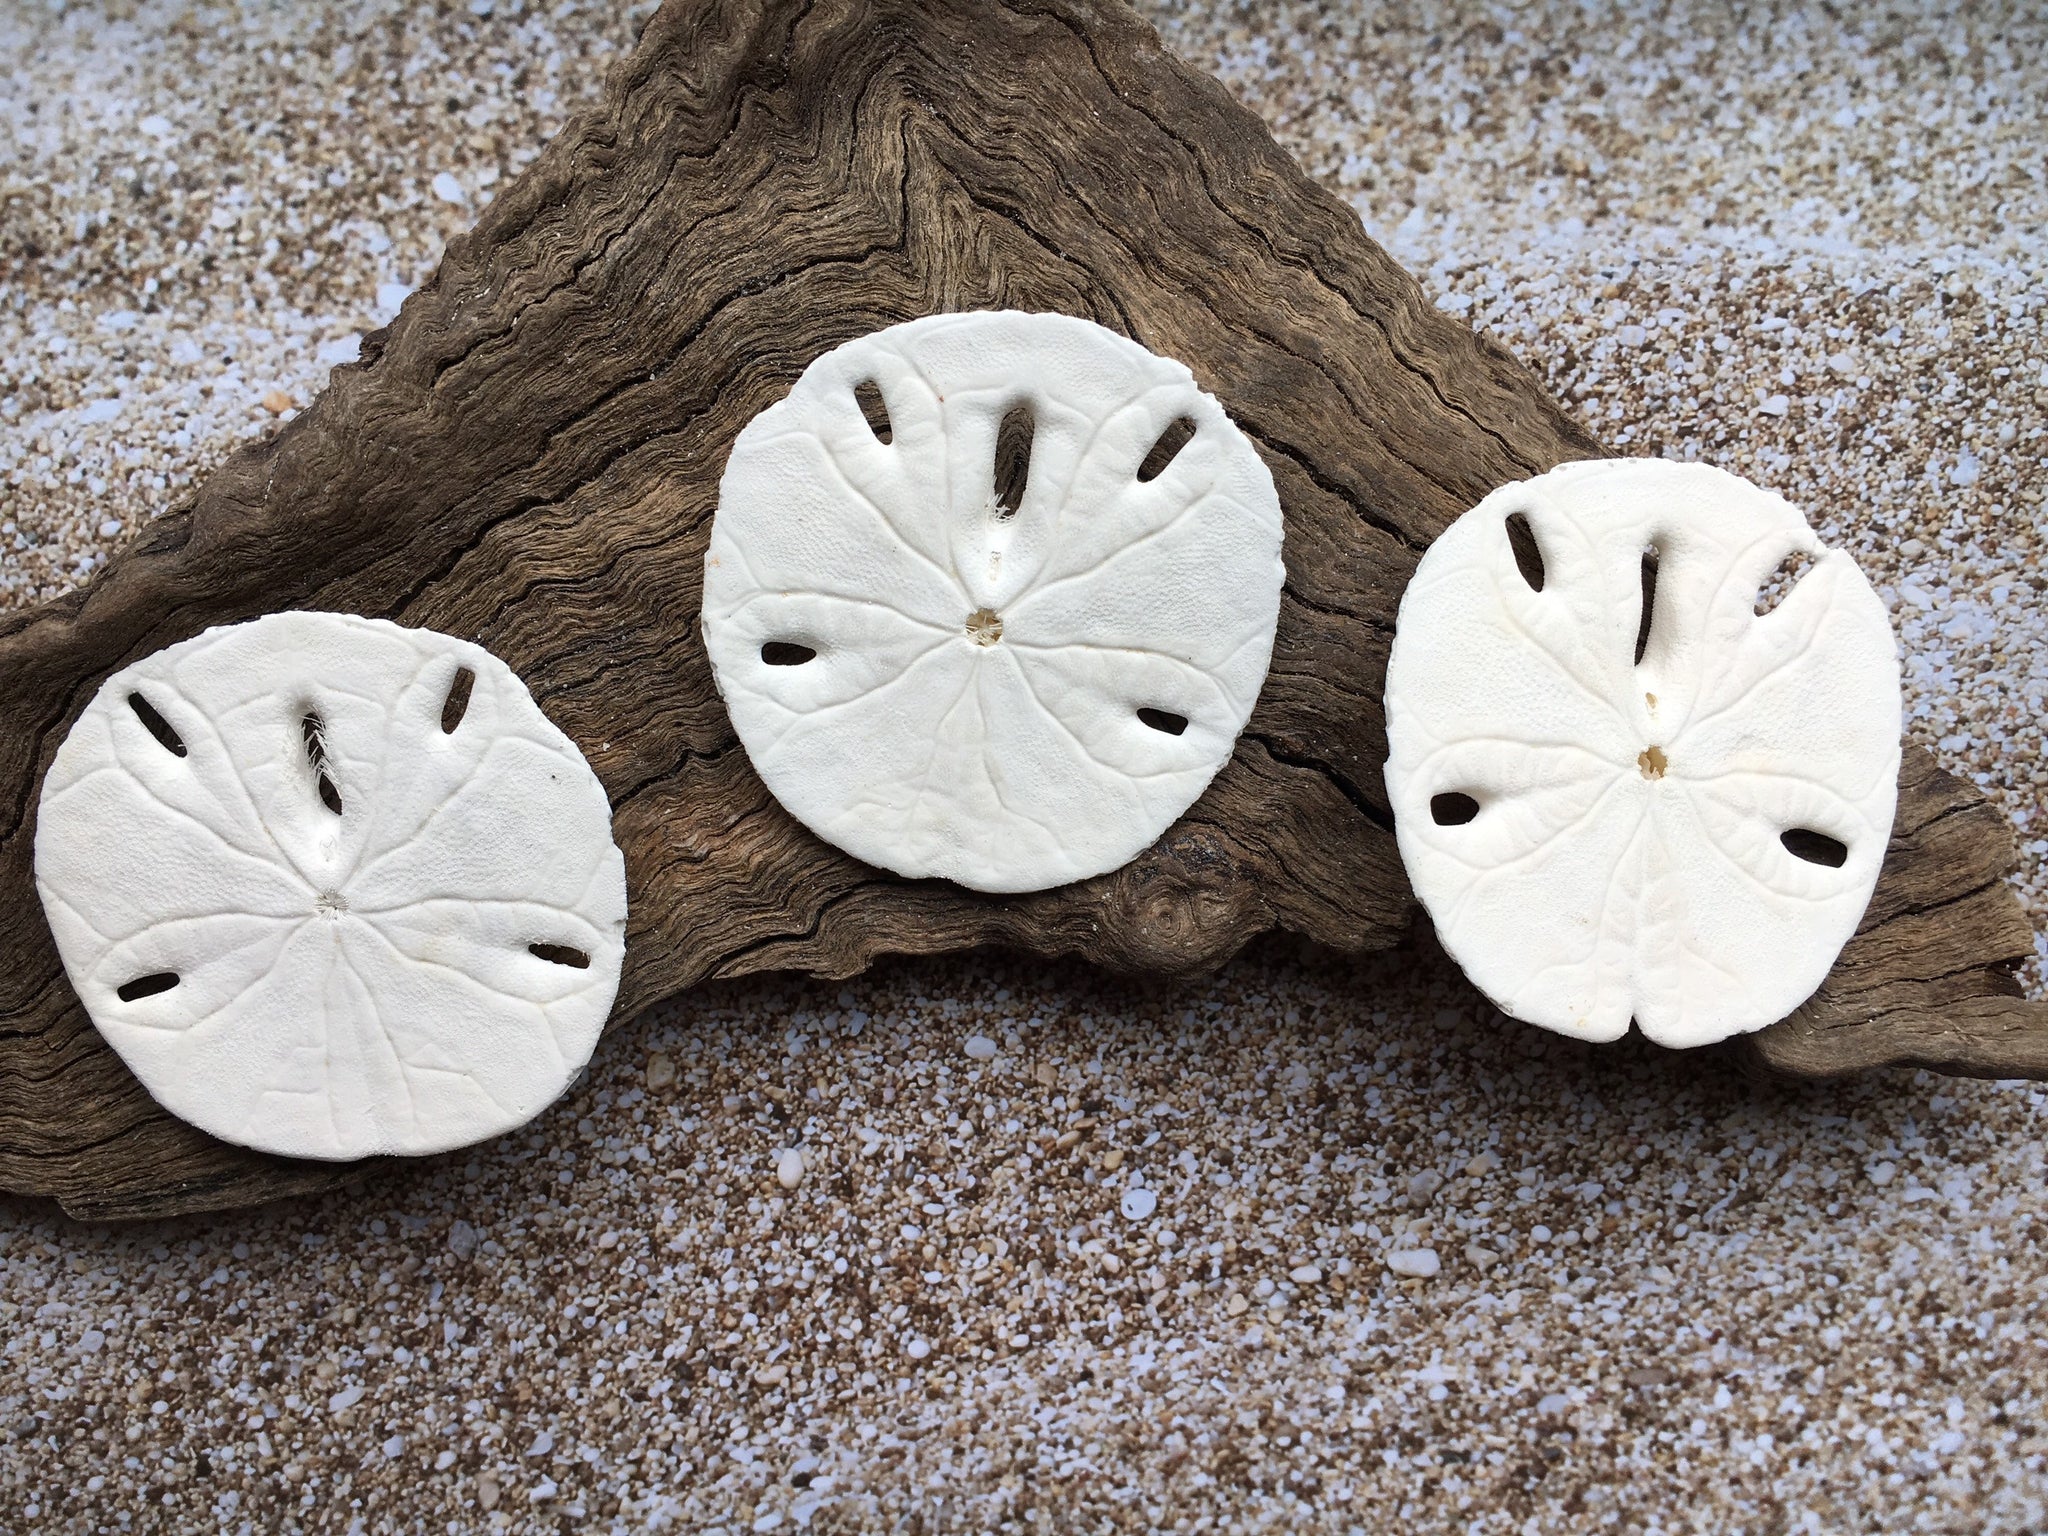 Sand Dollars 3-3.5 - 15pcs - Wedding Seashell Sand Dollar for Crafts - Bulk Sandollars Hand Picked and Packed by Tumbler Home in Florida